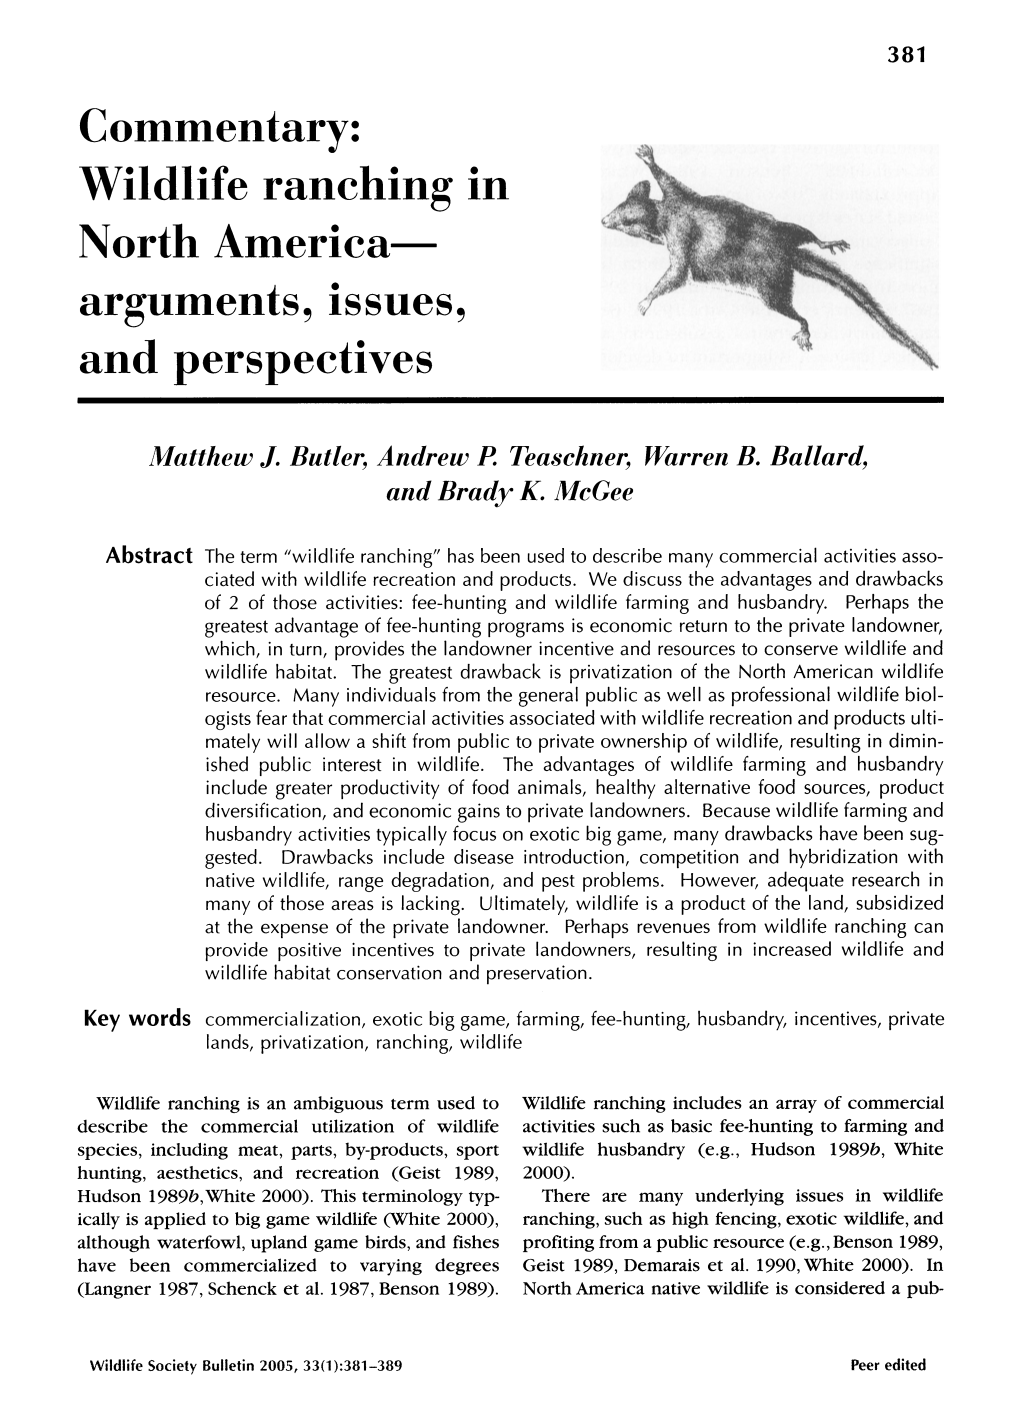 Wildlife Ranching in North America: Arguments, Issues, and Perspectives